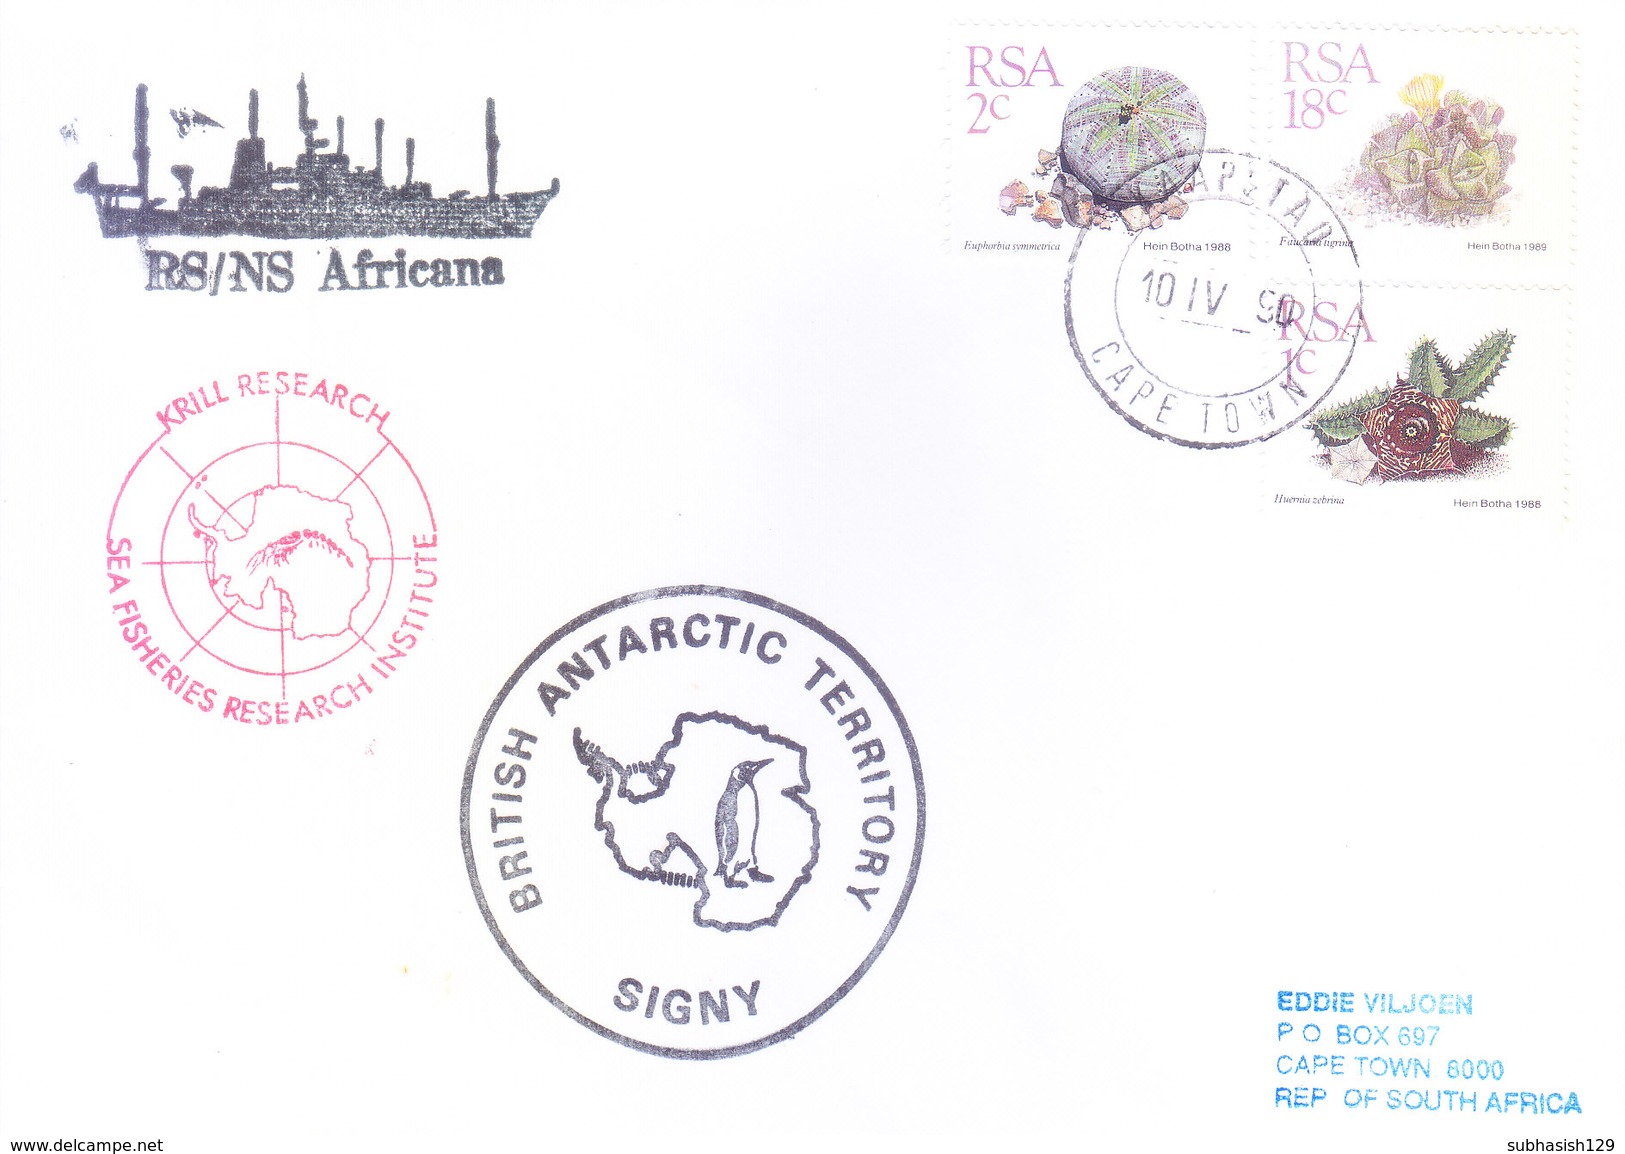 SOUTH AFRICA - ANTARCTIC EXPEDITION - 1990 - BRITISH ANTARCTIC TERRITORY LOGO, NS AFRICANA, KRILL RESEARCH - Covers & Documents